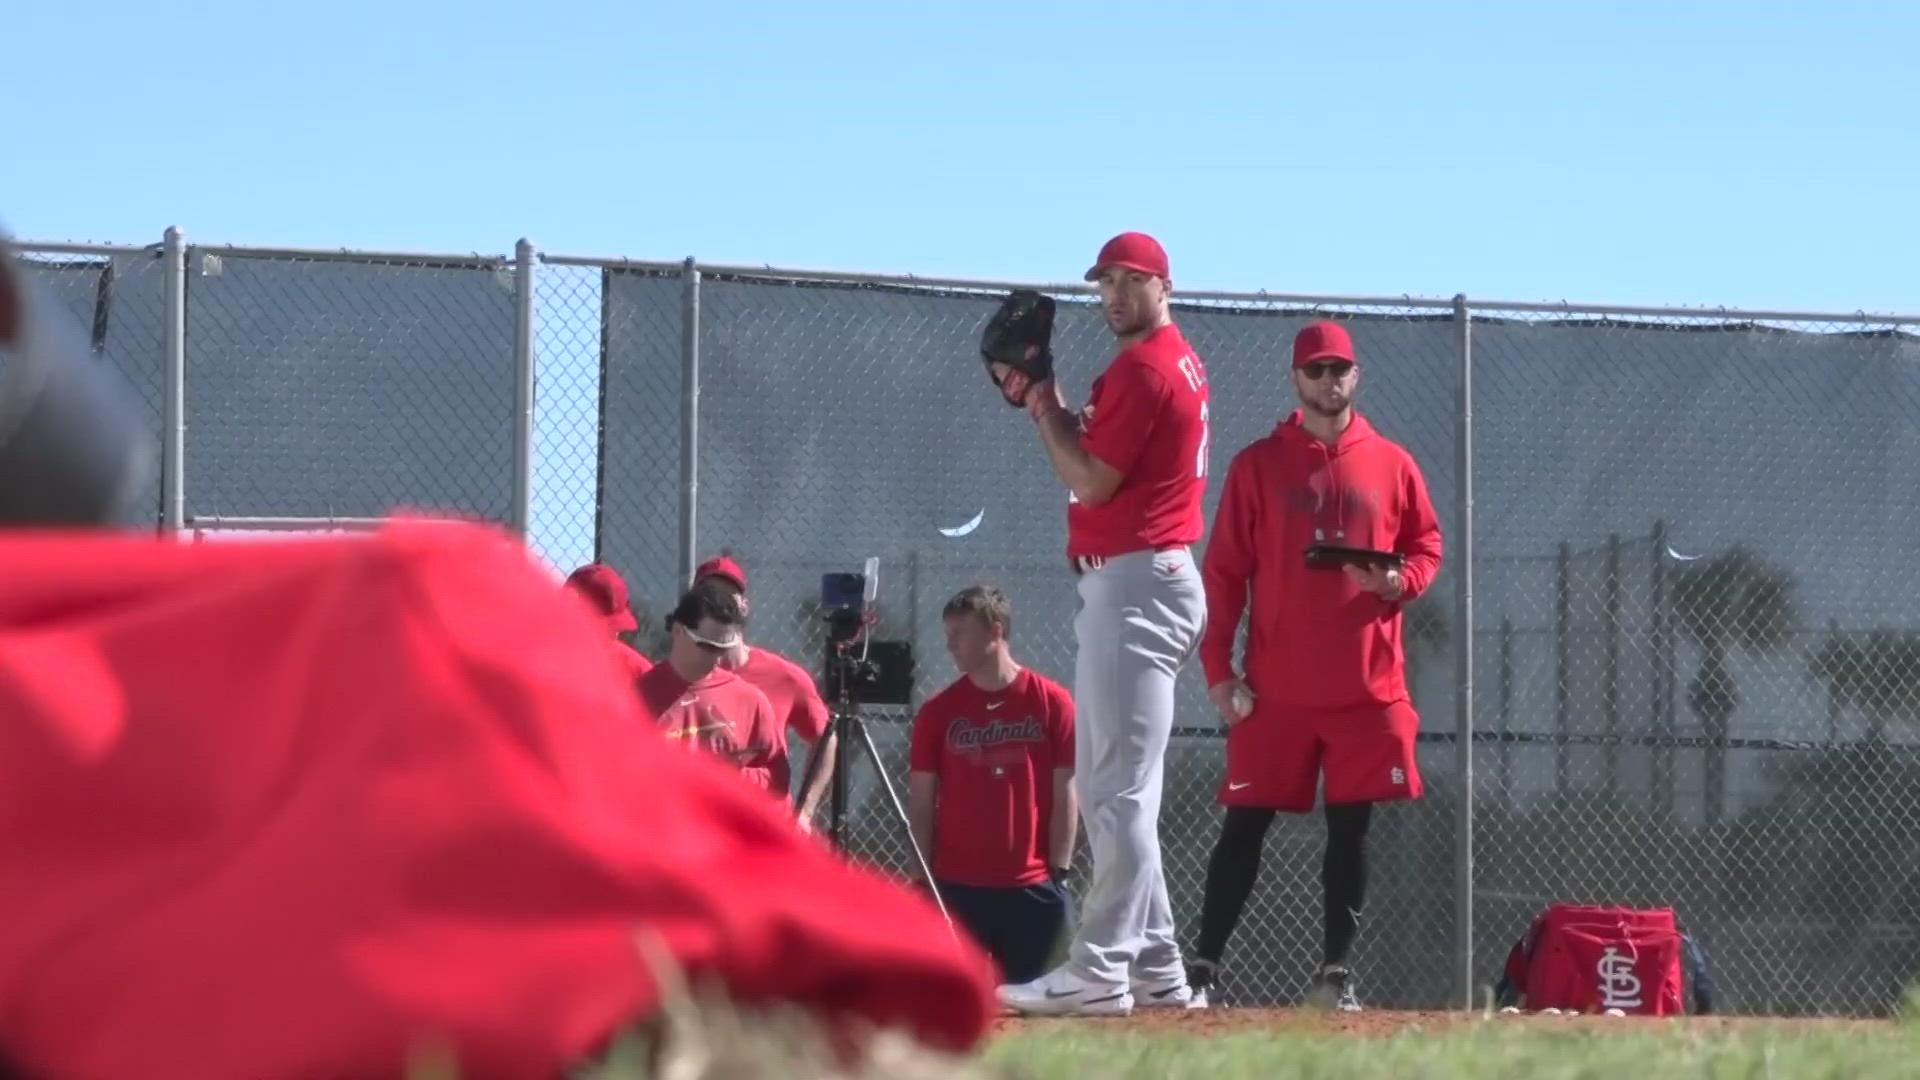 The St. Louis Cardinals have their first spring training game Feb. 25. Training wraps up the end of March.